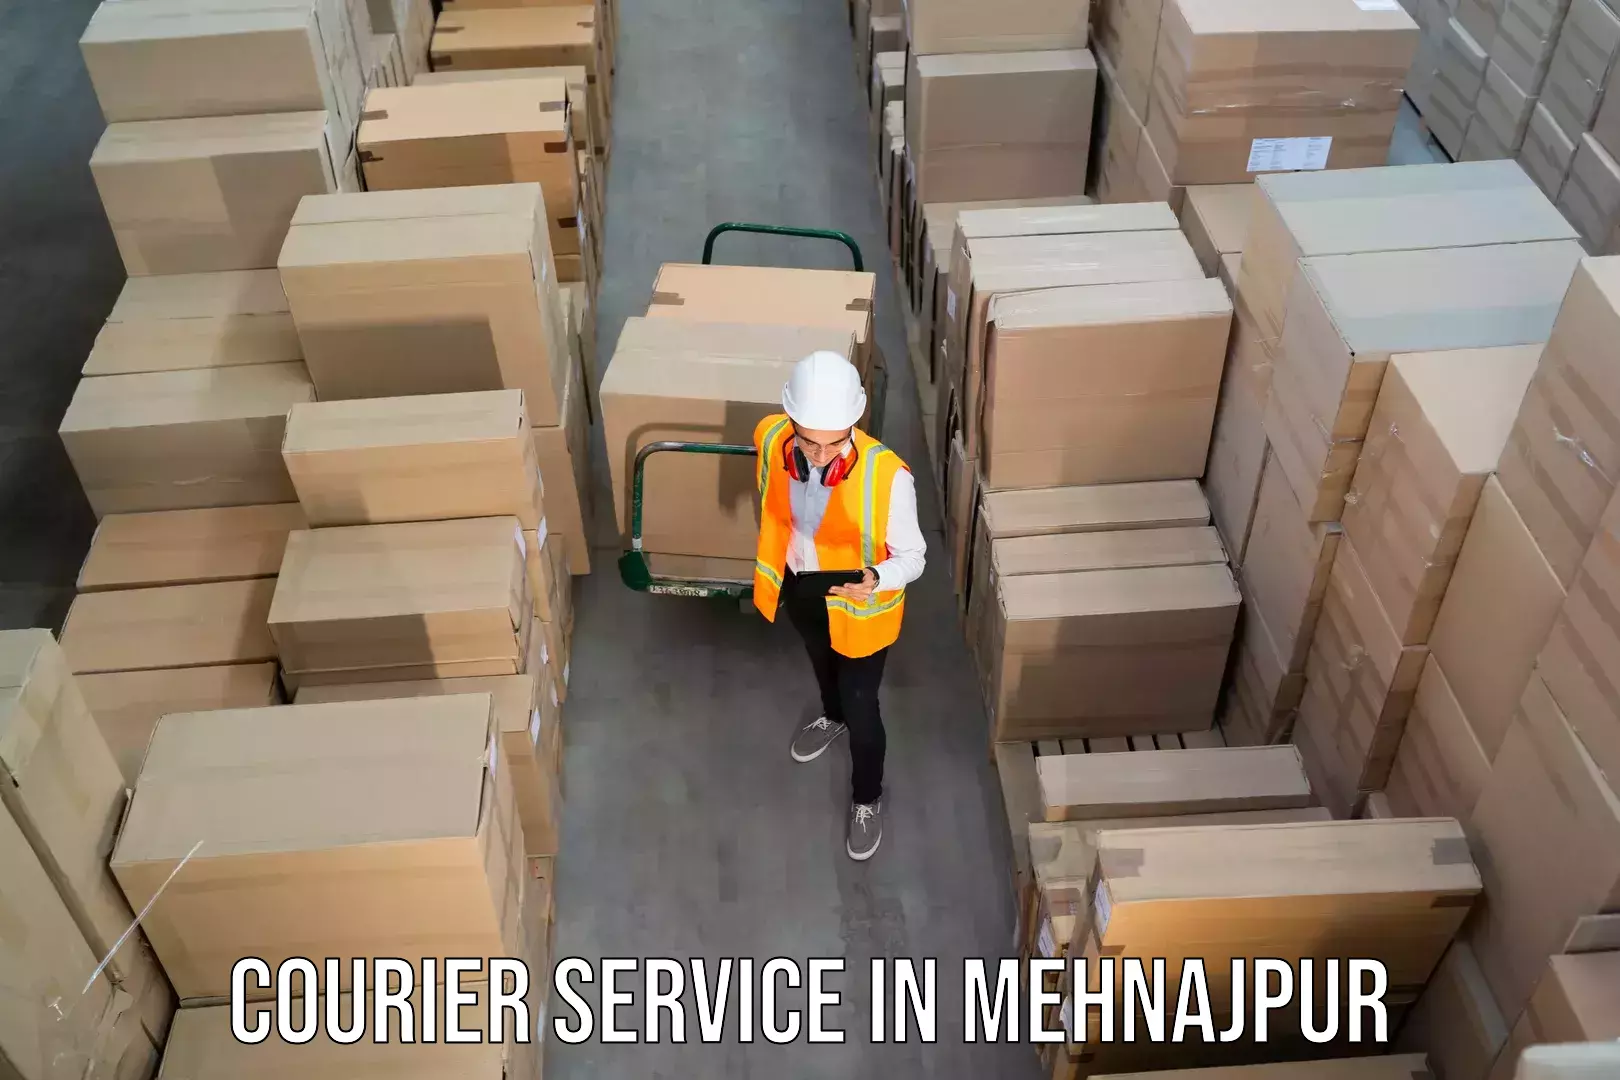 Fastest parcel delivery in Mehnajpur